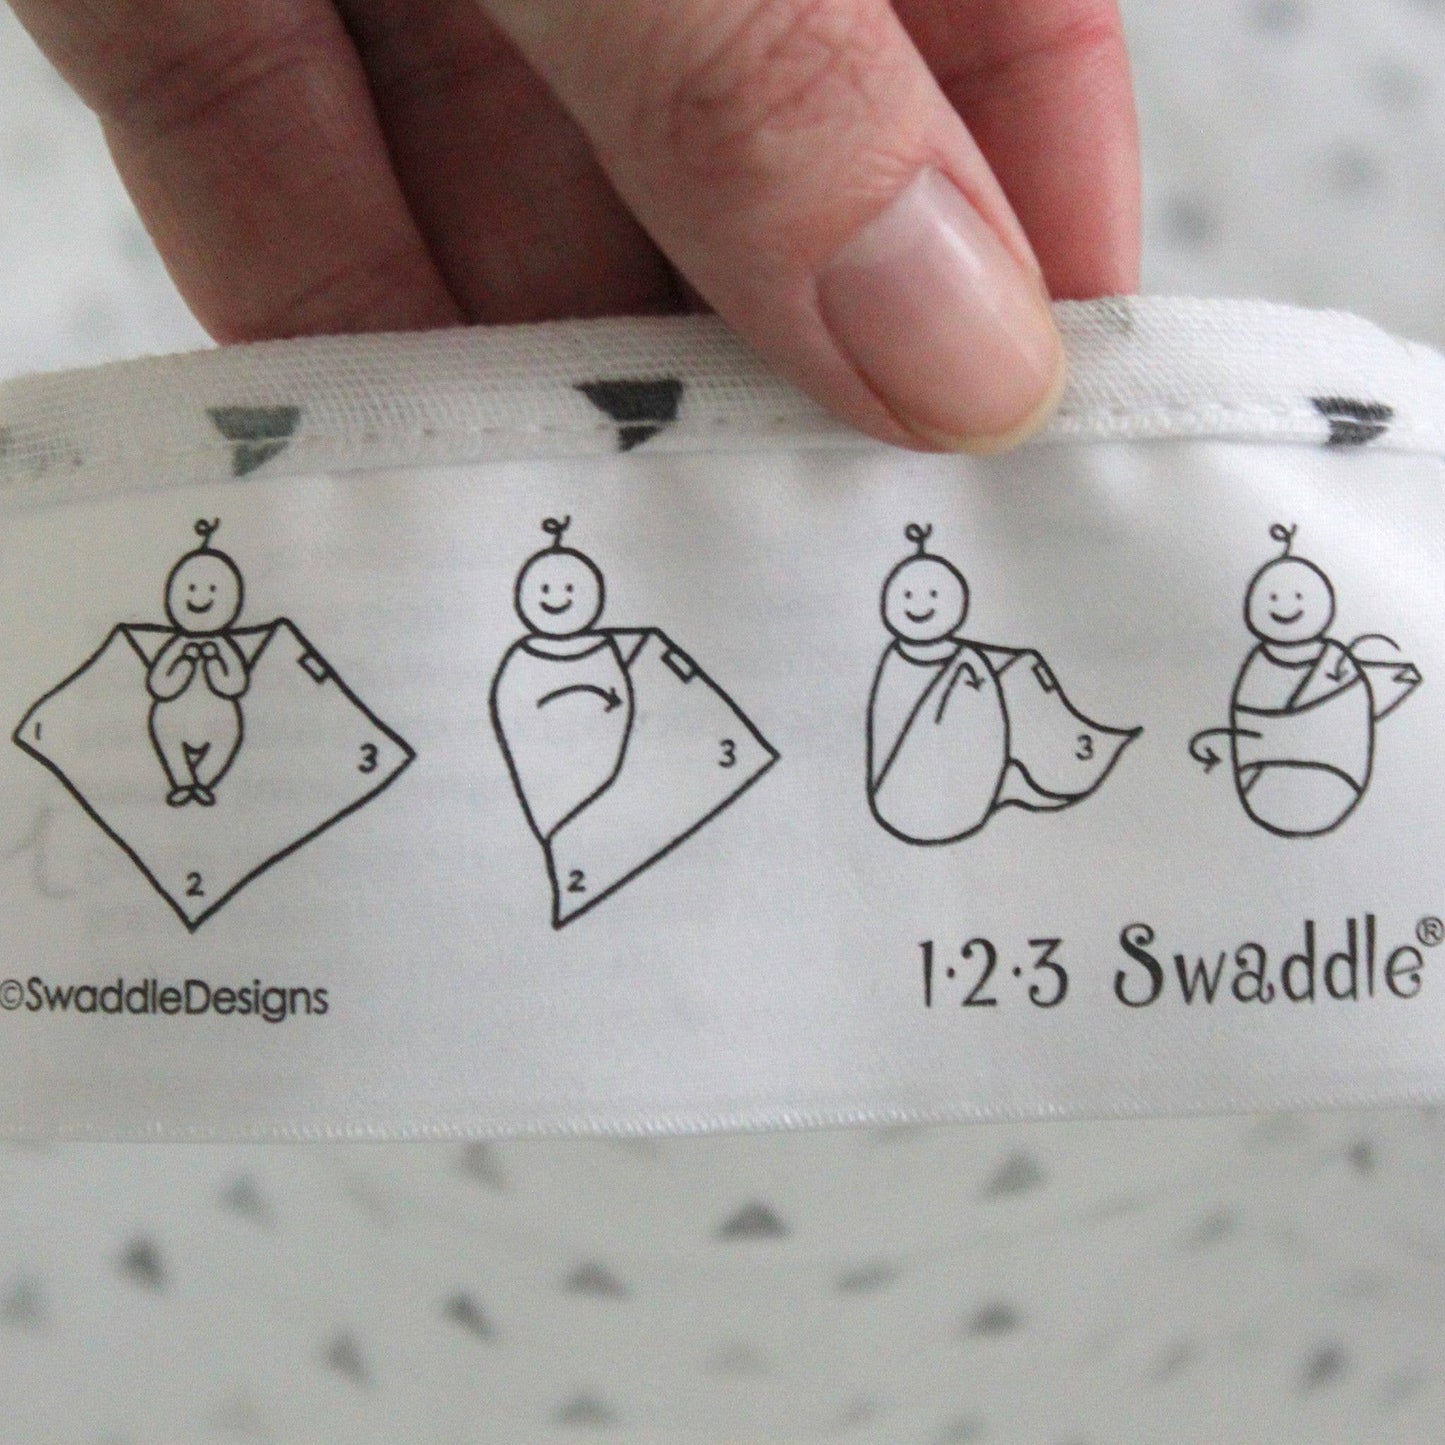 MUSLIN SWADDLE BLANKETS - FLORAL/GOLD